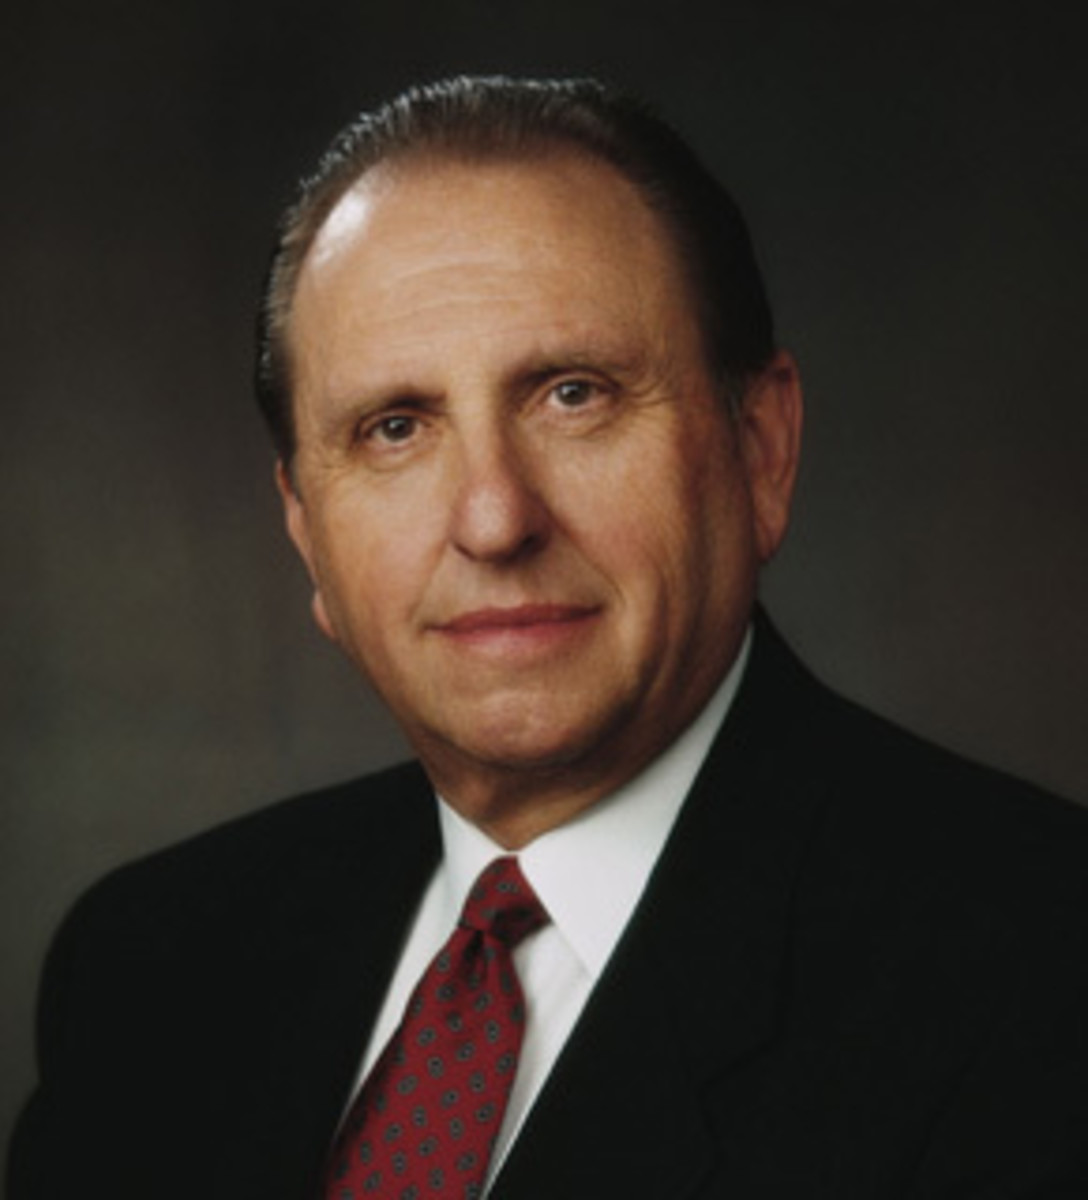 New President Thomas S. Monson, is the highest ranking official in The Mormon Church.